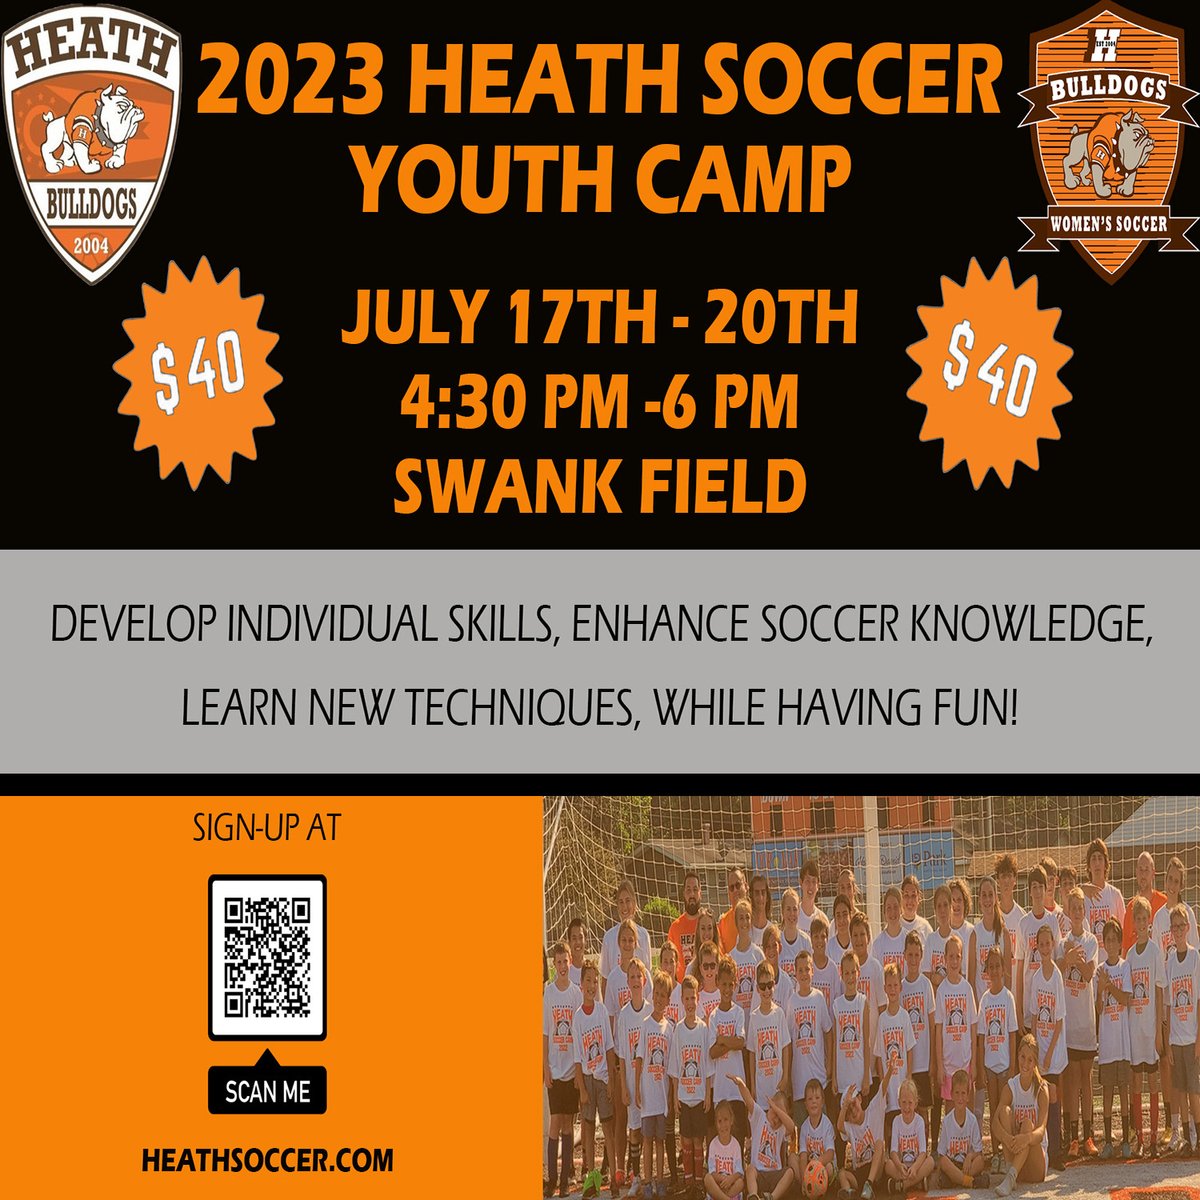 You never know on which amazing Heath Alumni Soccer Players may come and visit🕵️!!!!!!  Guess you will have to sign up and find out

#SoccerCamp #HeathSoccer 

@Heath_Soccer @heath_schools @HeathOhio @HEATHHS_AD